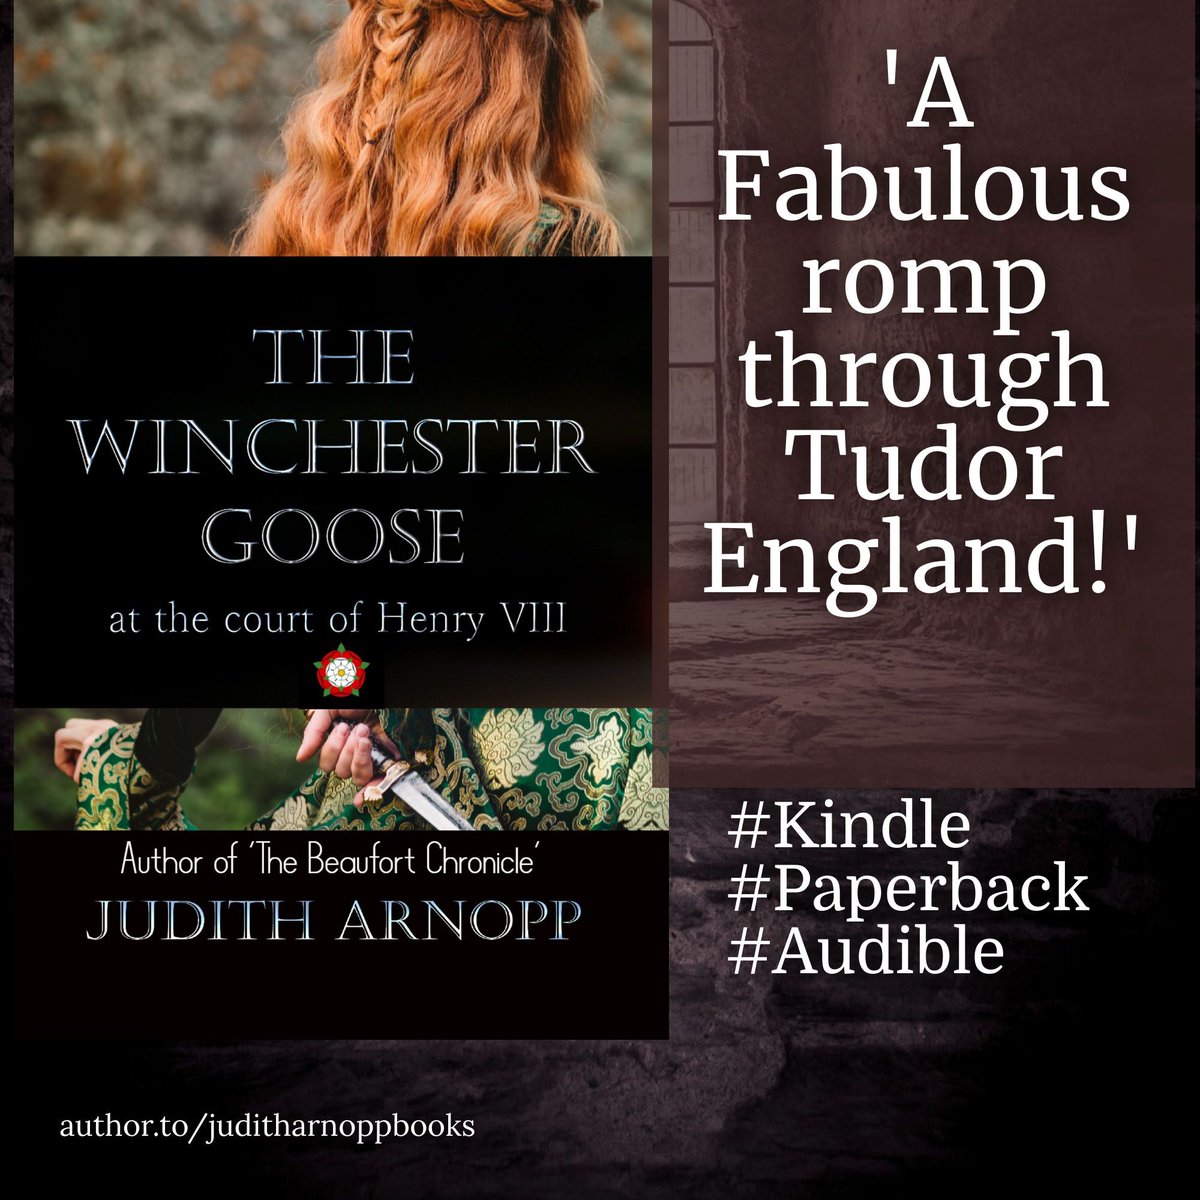 'Evocative and moving, the period is brutally and wonderfully drawn.' #Review mybook.to/thewinchesterg… #HistoricalFiction #Tudors #Audible #Paperback #Kindle #KU